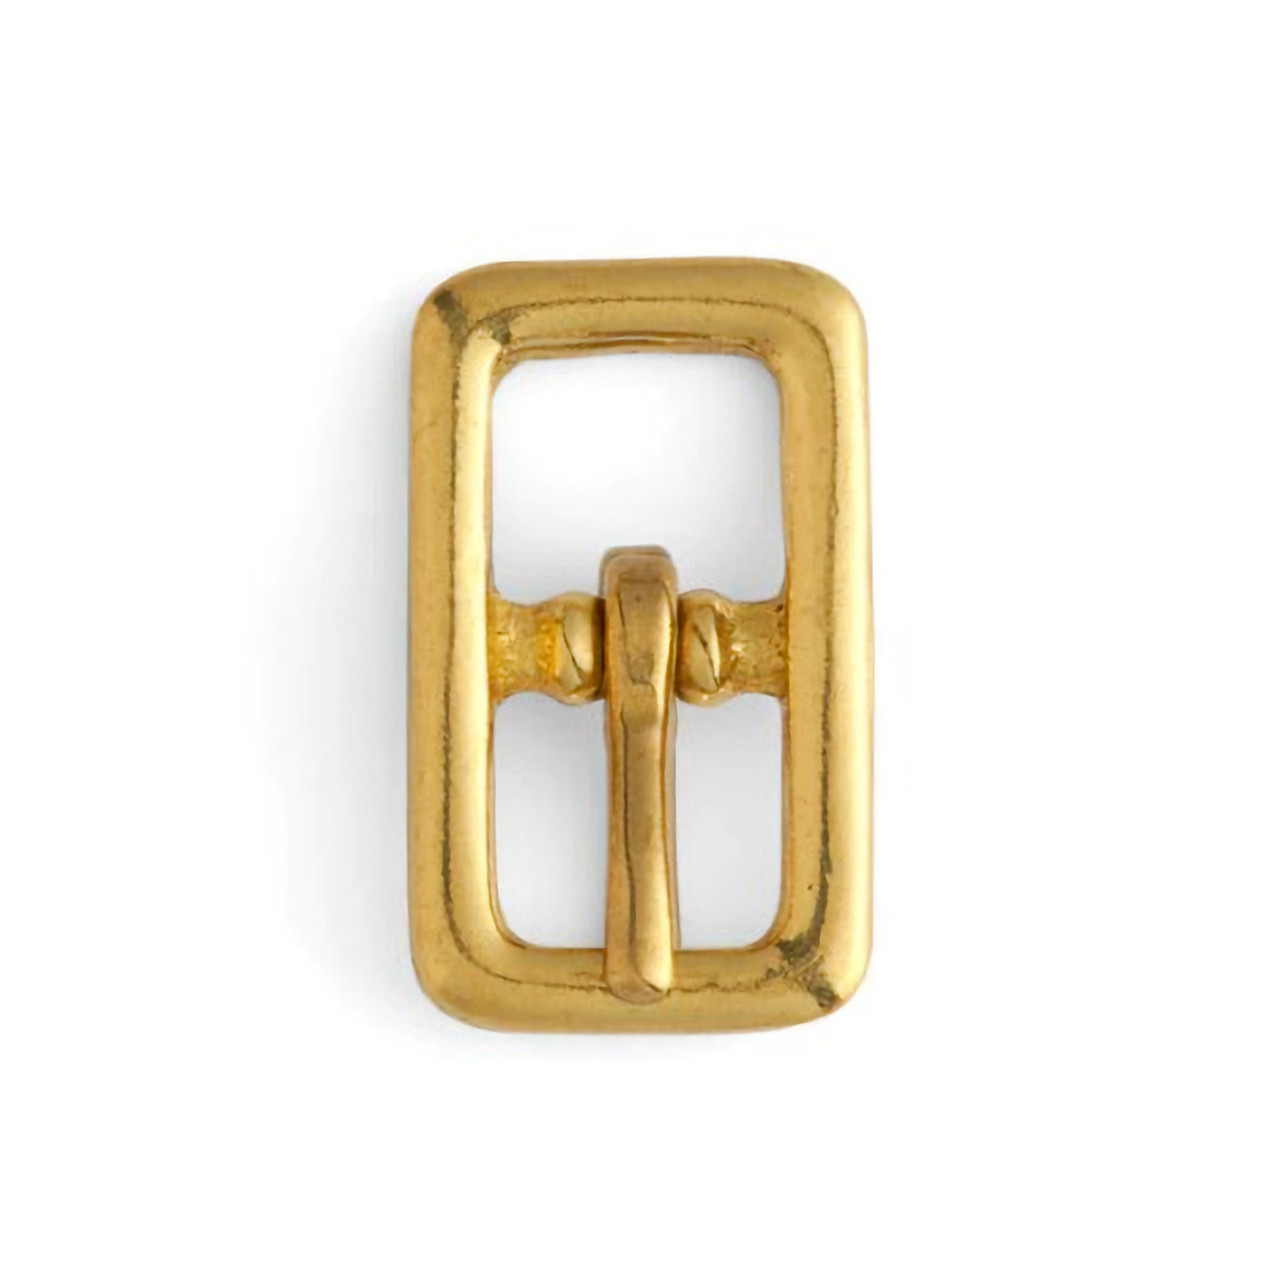 Solid brass 1/2" halter buckle showing top view.